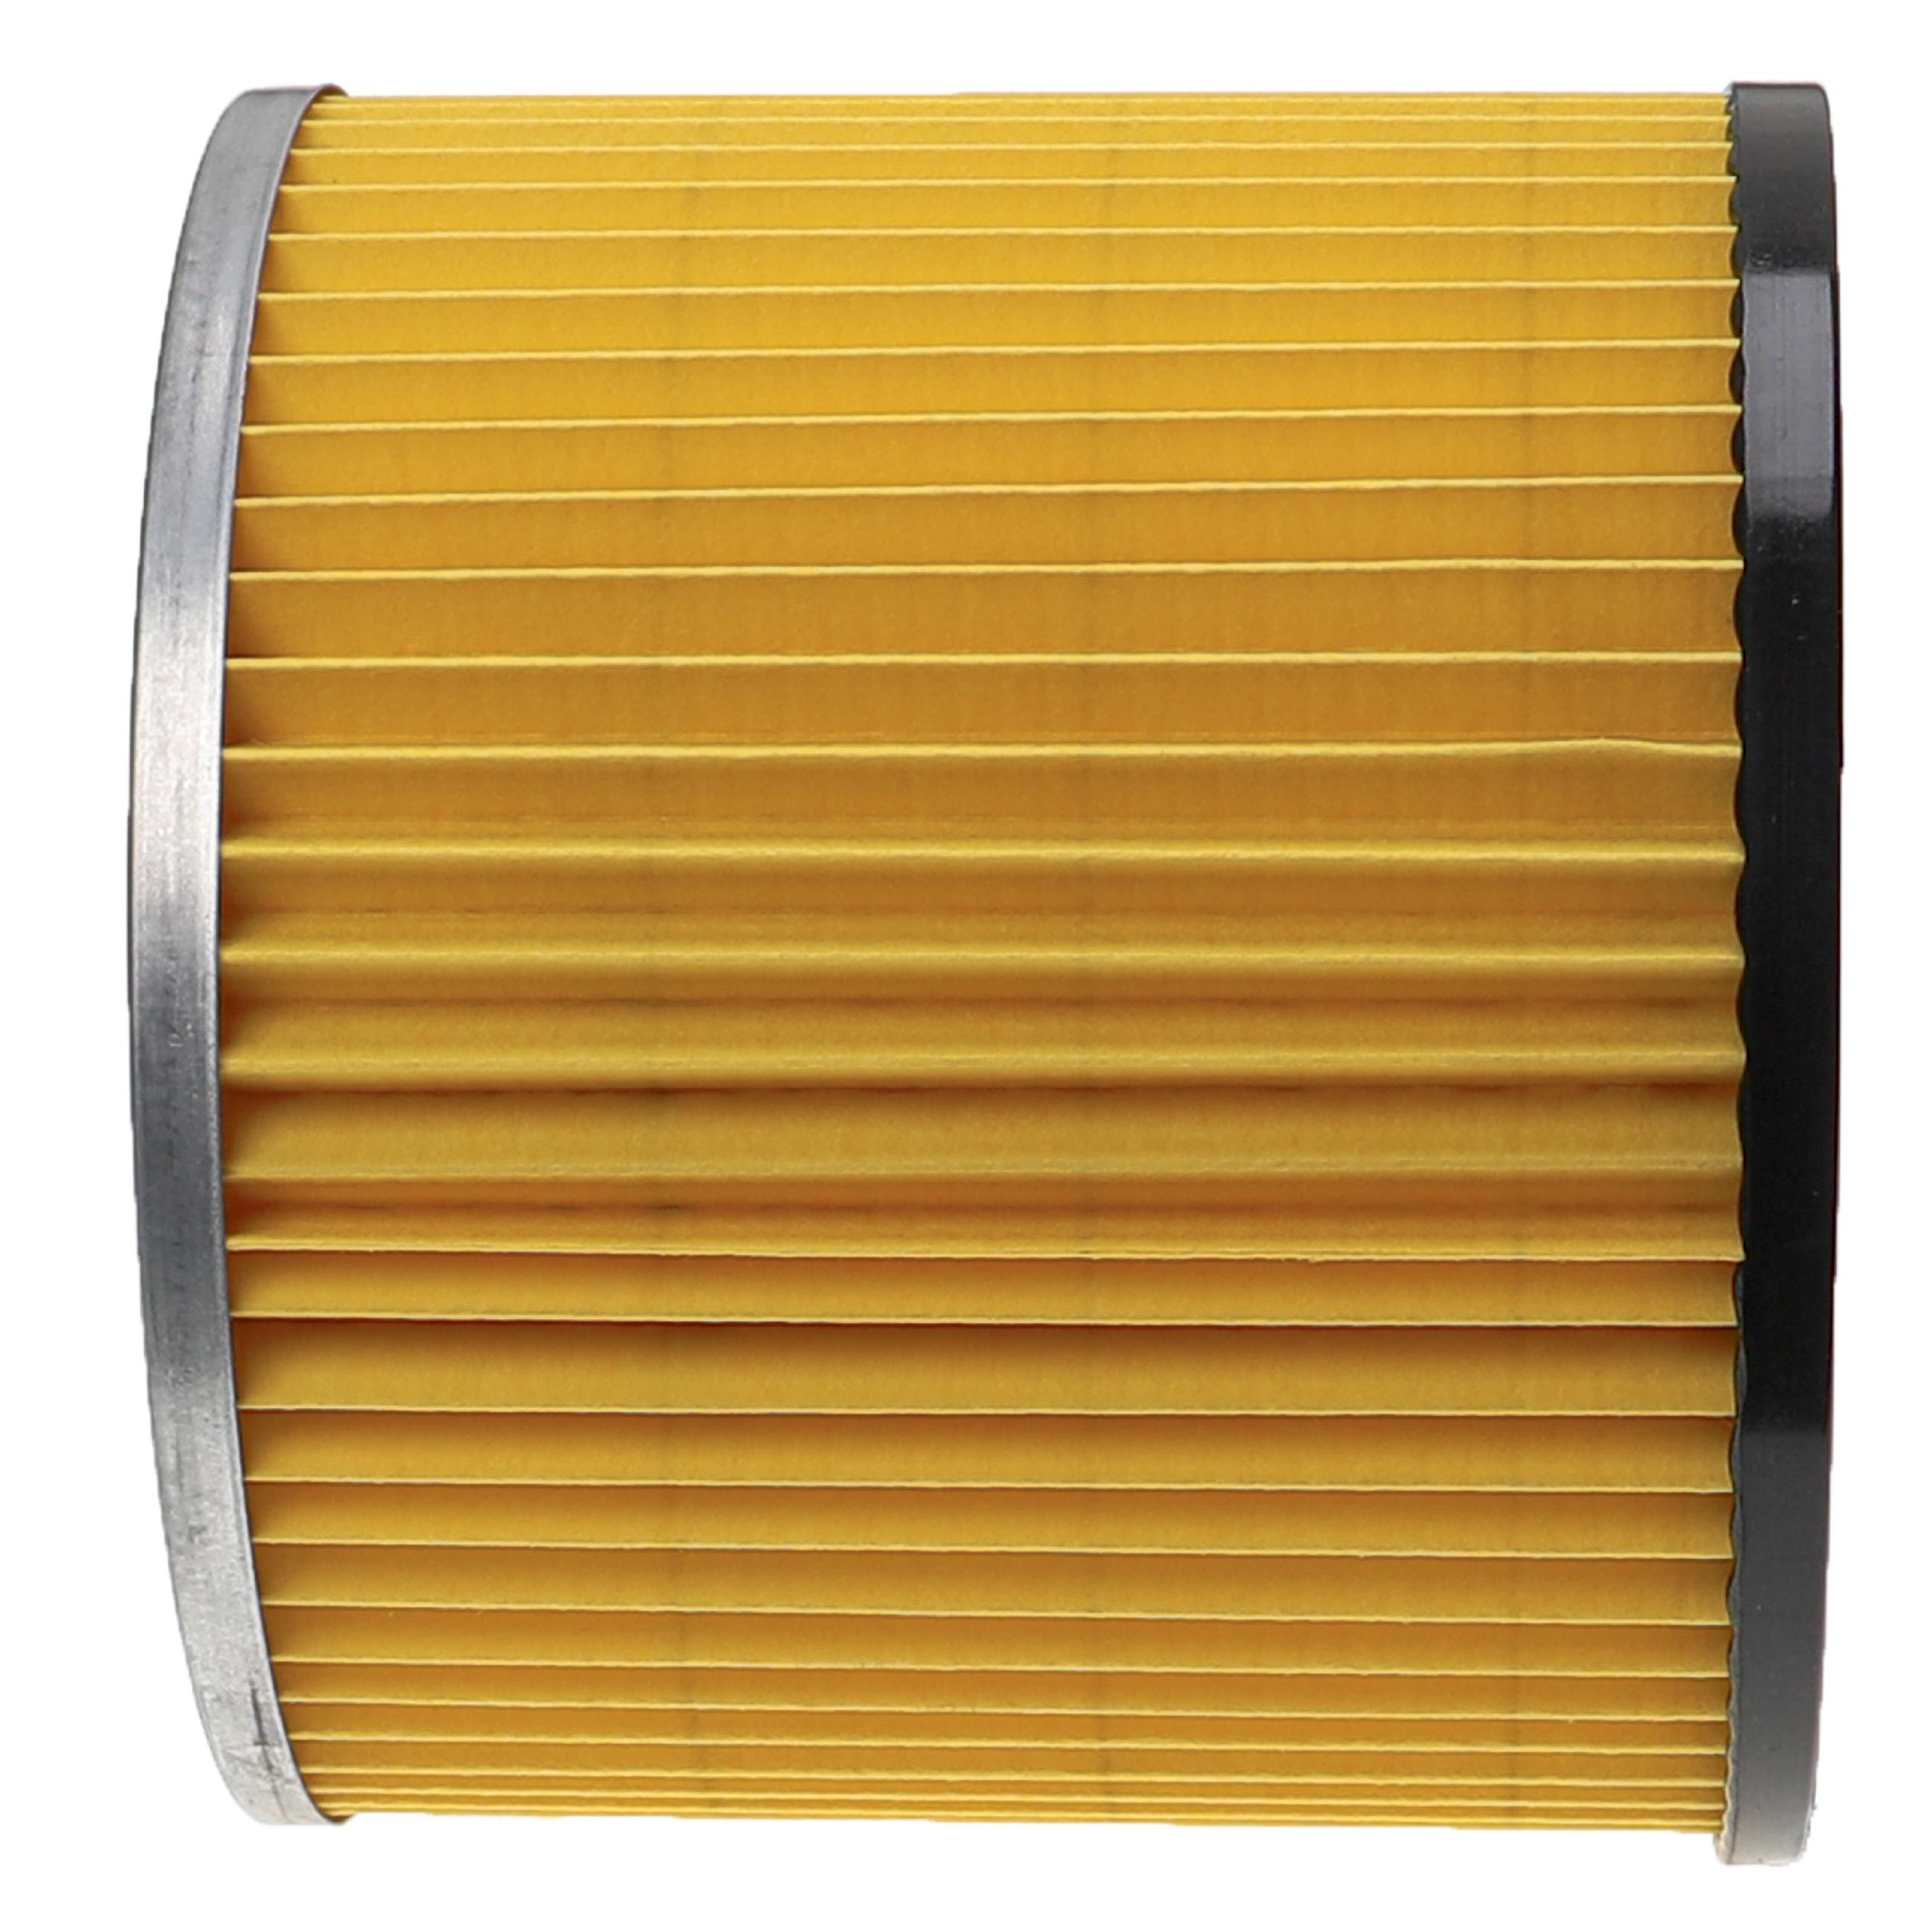 Filter as Replacement for Scheppach Filter 75100701 Suitable for Güde, Scheppach, Woodster, KITY Suction Unit